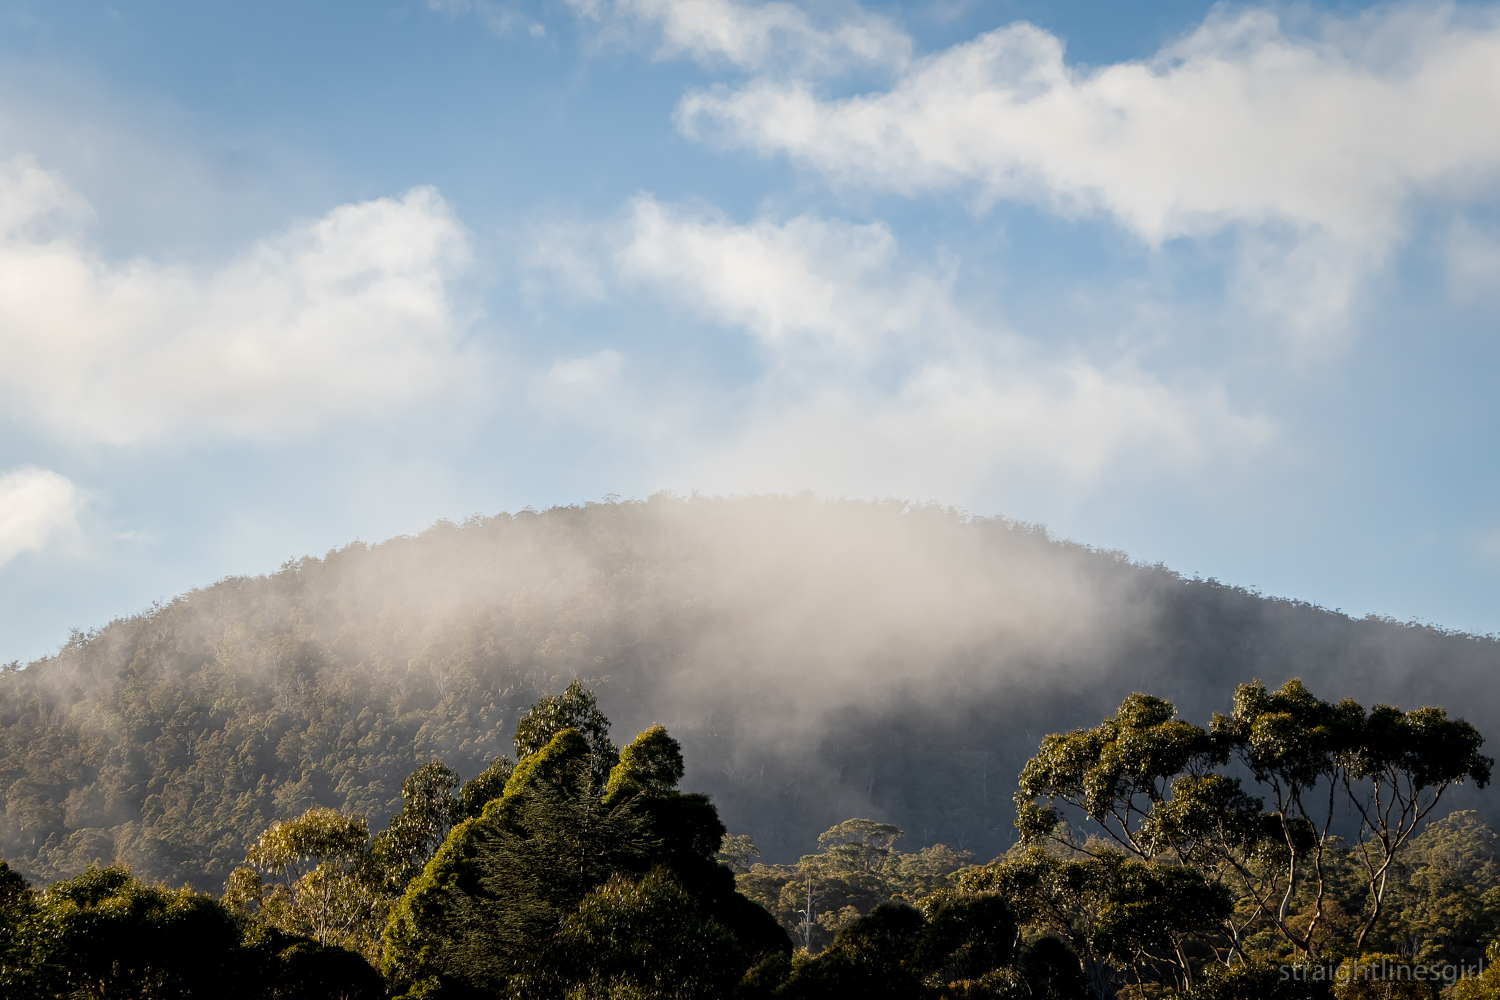 mist over distant hills with trees in the foreground